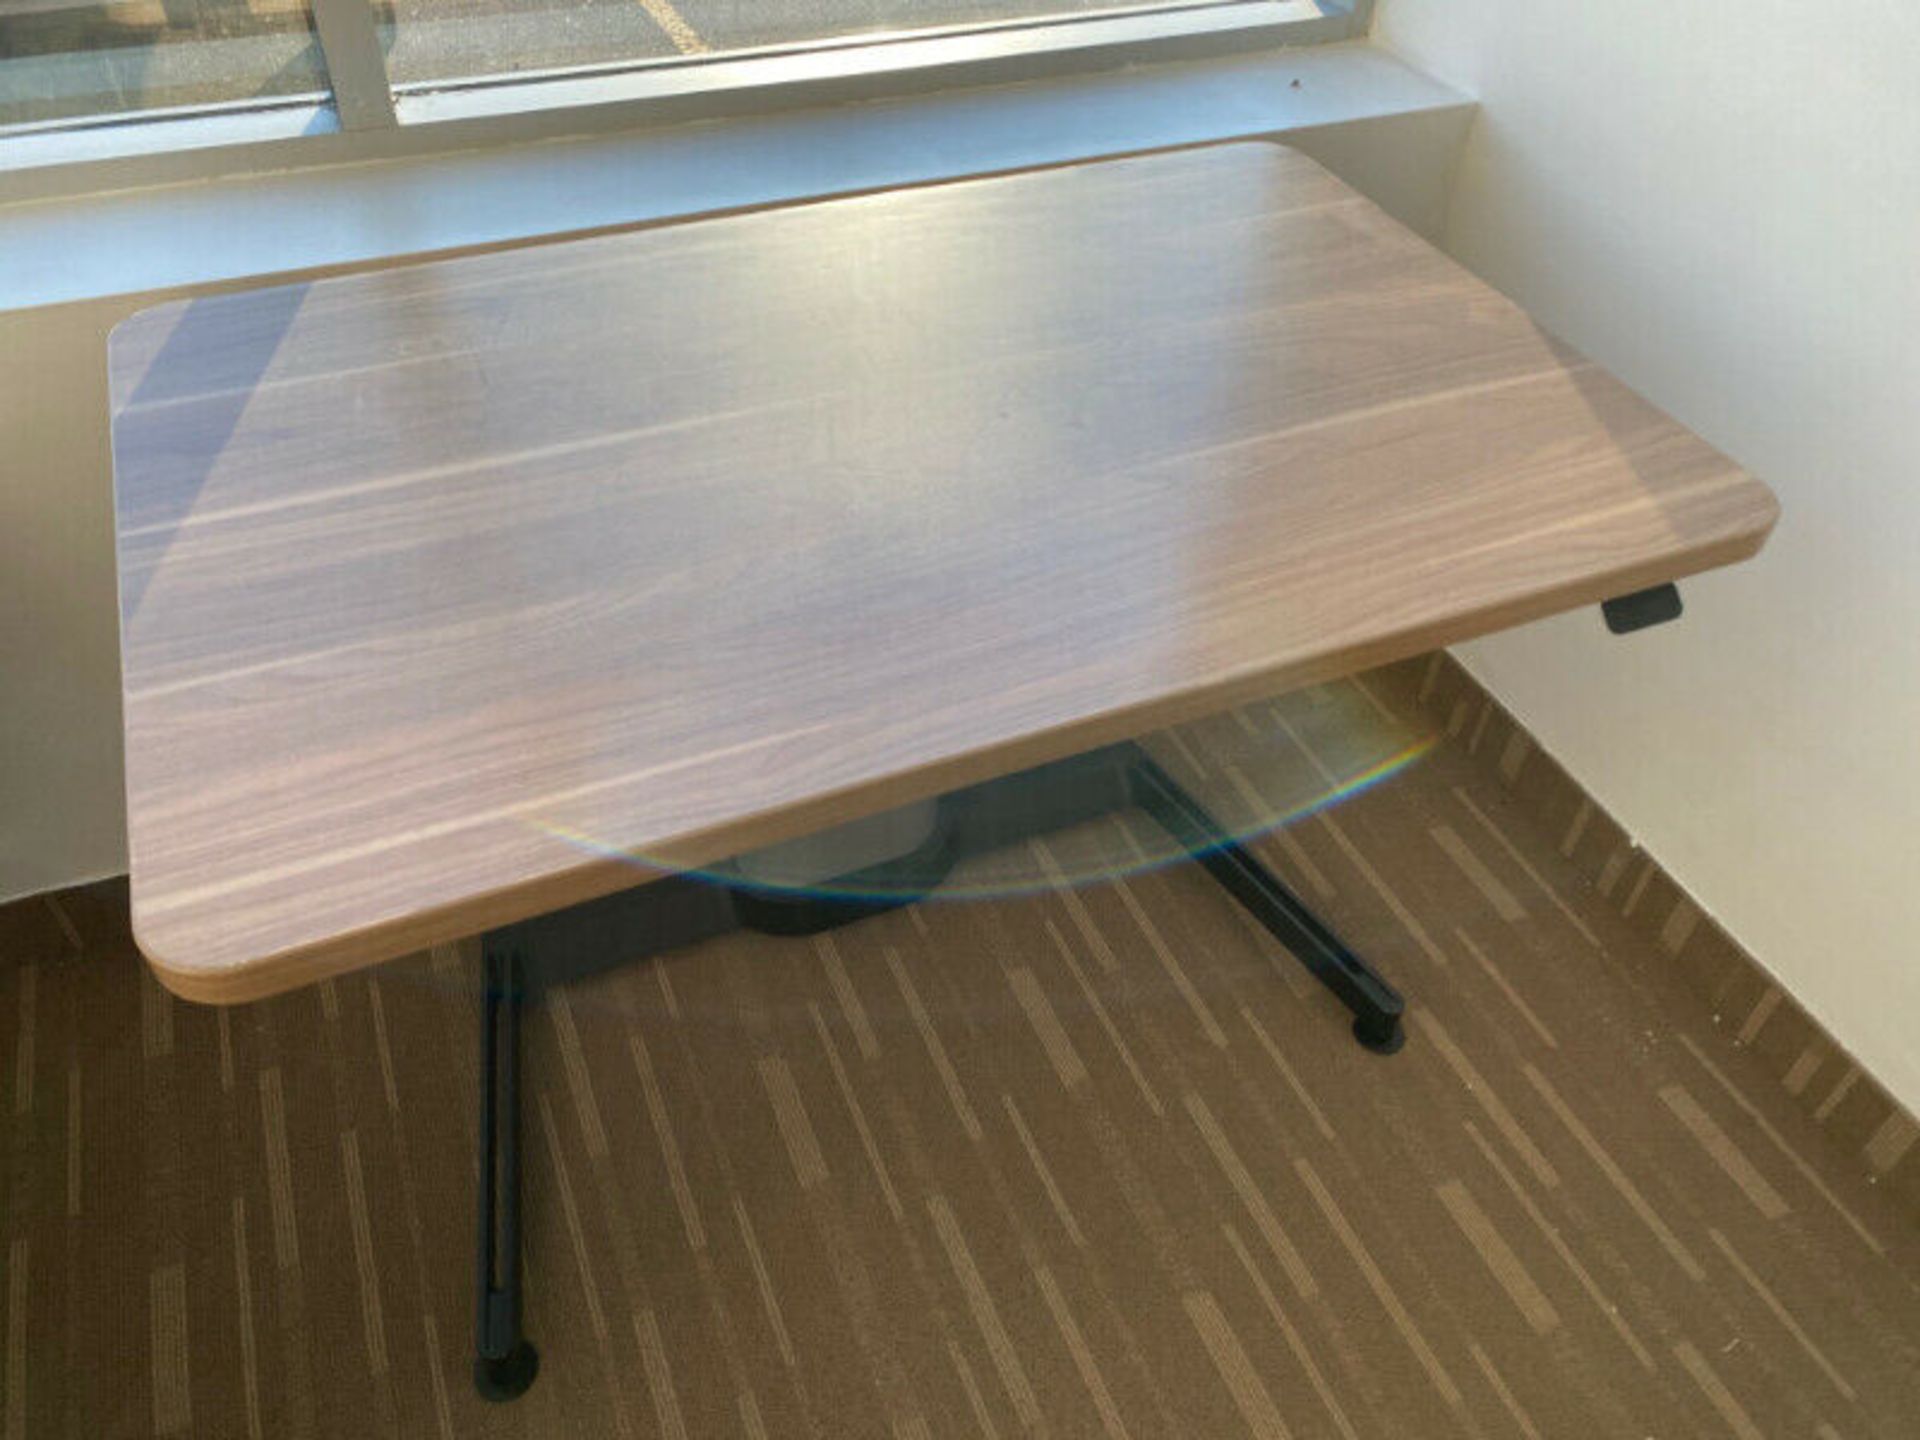 STEELCASE AIRTOUCH 28.25 X 46" HEIGHT ADJ DESK - Image 2 of 3